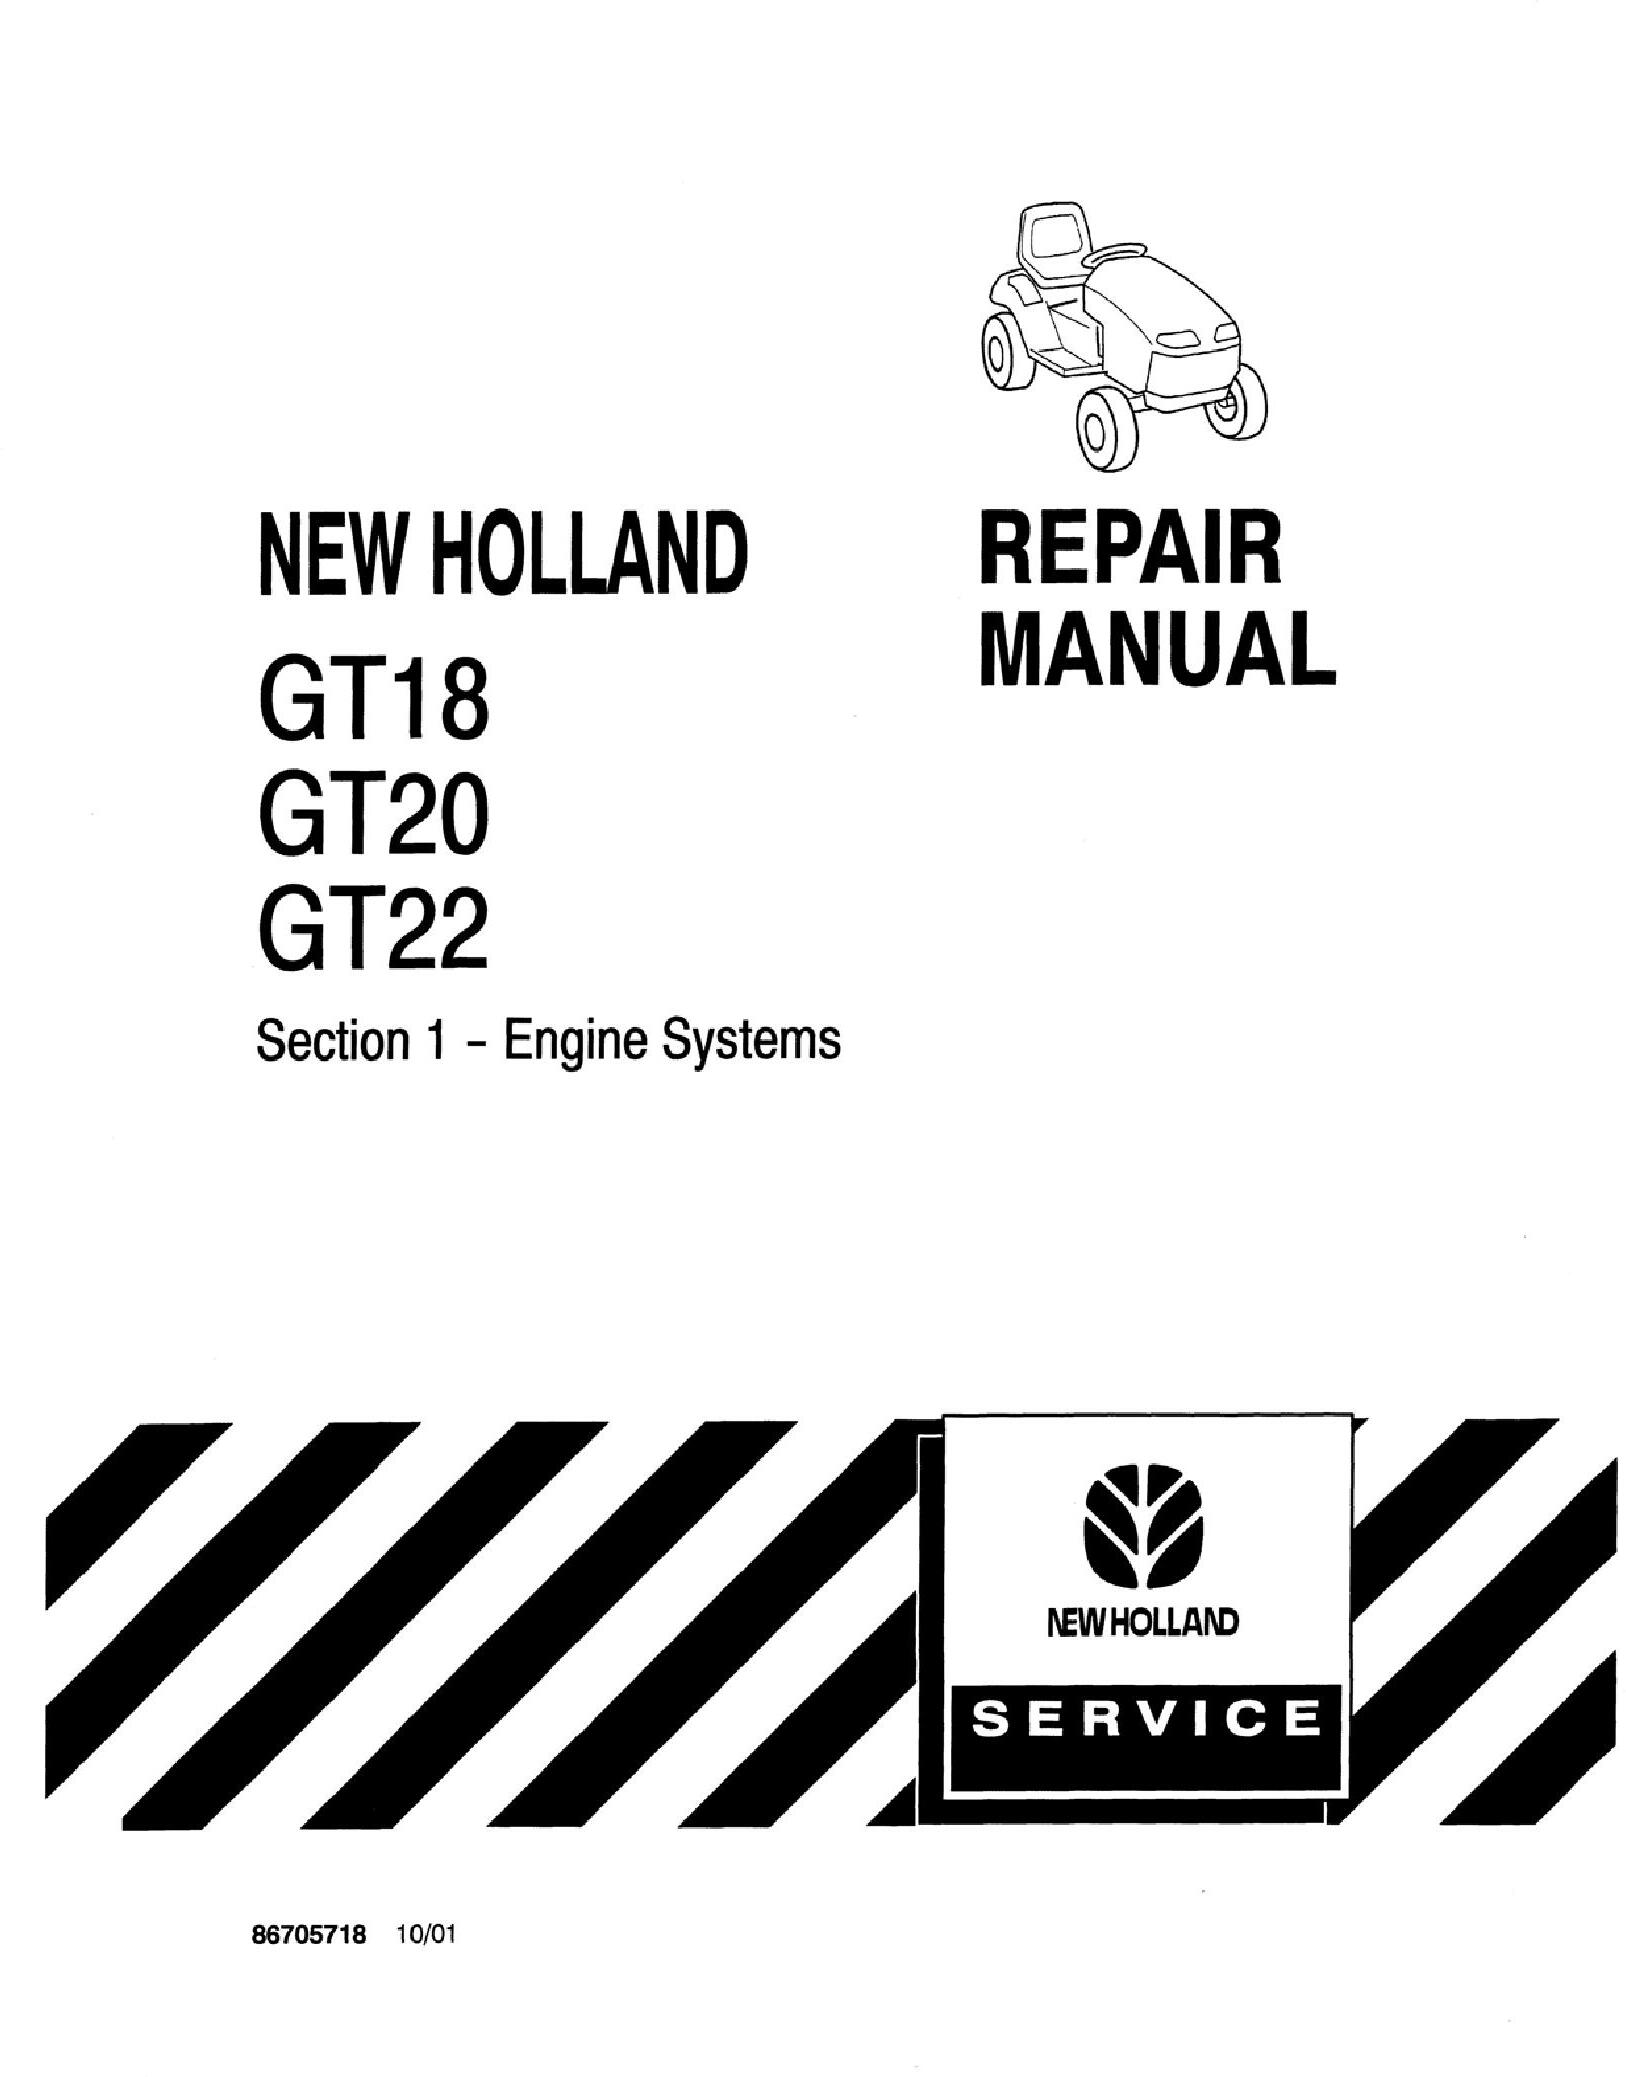 New Holland GT18, GT20, GT22 Garden Tractor COMPLETE Service Manual - 19591